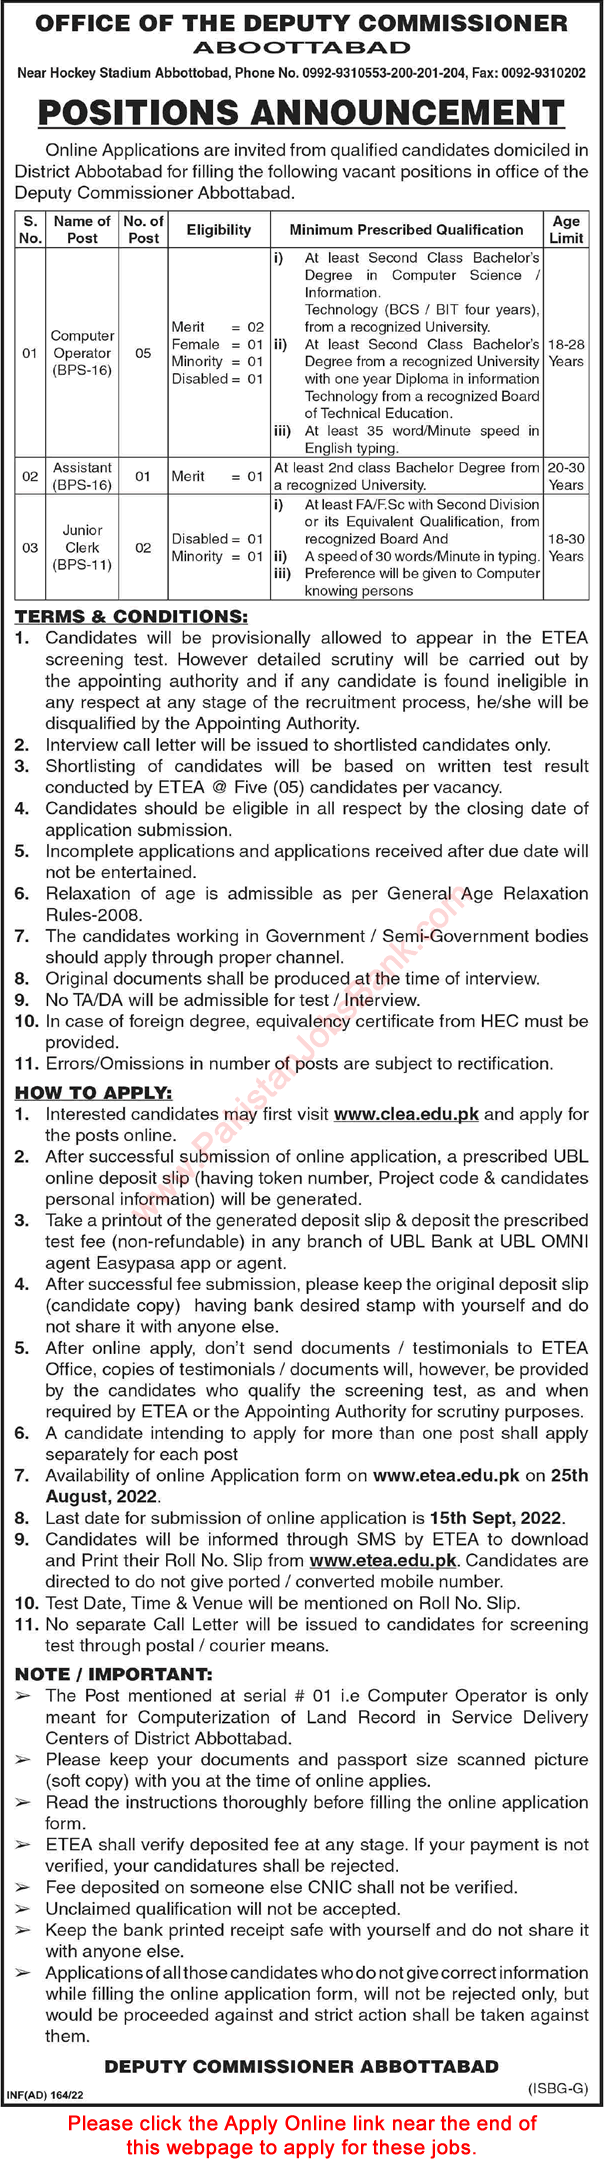 Deputy Commissioner Abbottabad Jobs 2022 August ETEA Apply Online Computer Operator & Others Latest